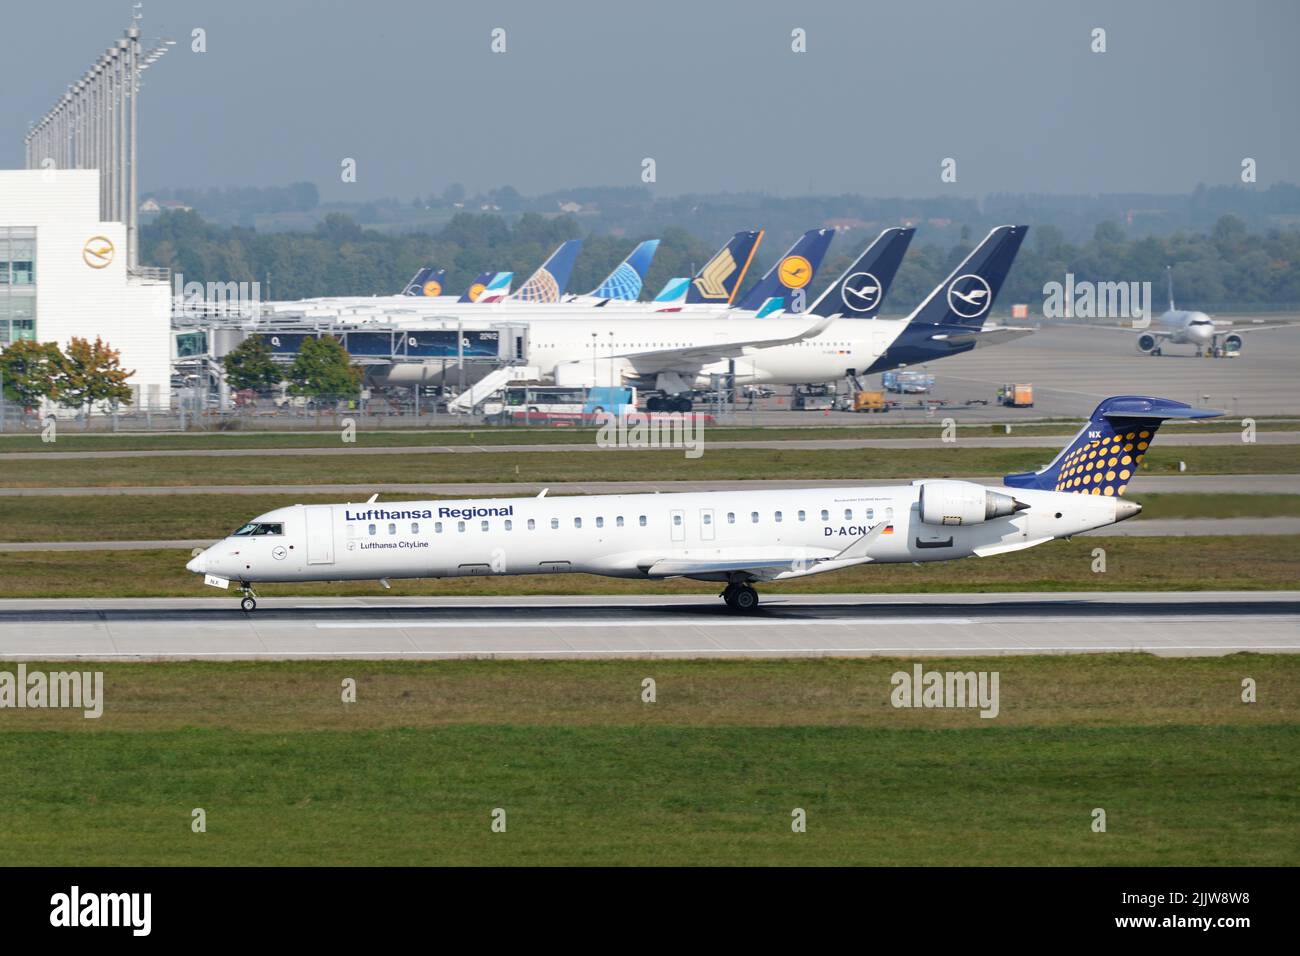 Departing Lufthansa Regional jet in front of parked aircraft at the terminal of Munich Airport, Germany, local transportation with short-haul flights. Stock Photo